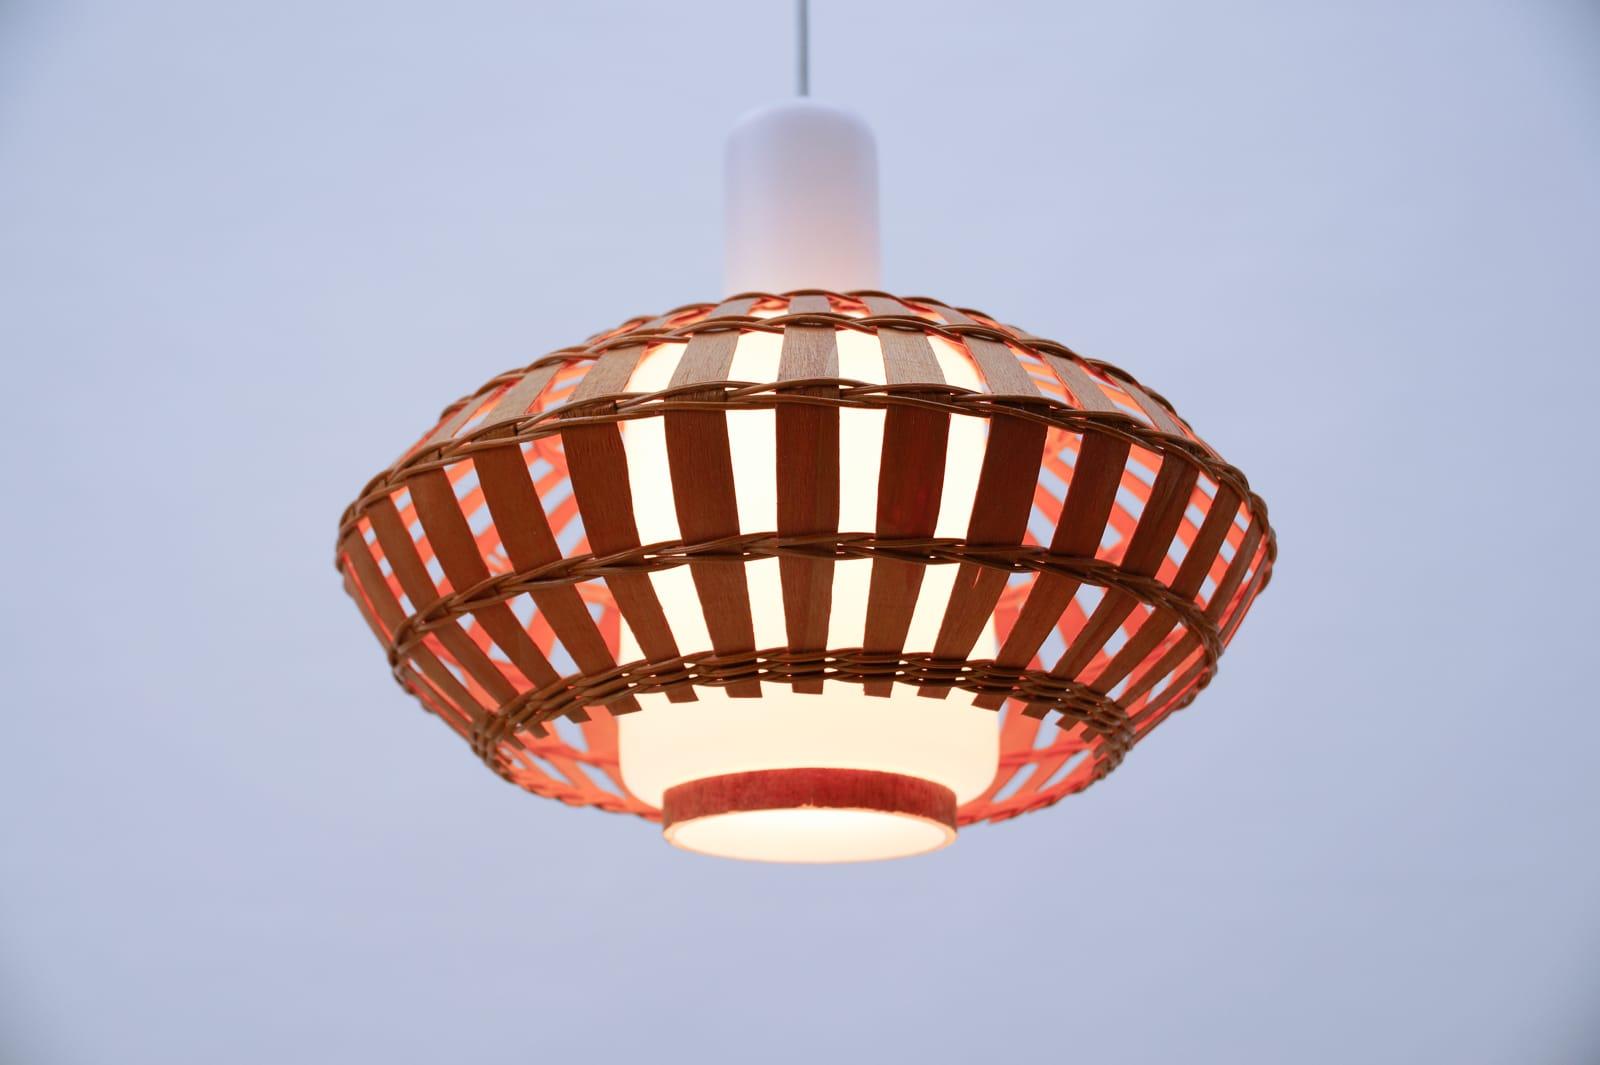 Mid-20th Century Opaline Glass and Wicker Ceiling Lamp, 1960s For Sale